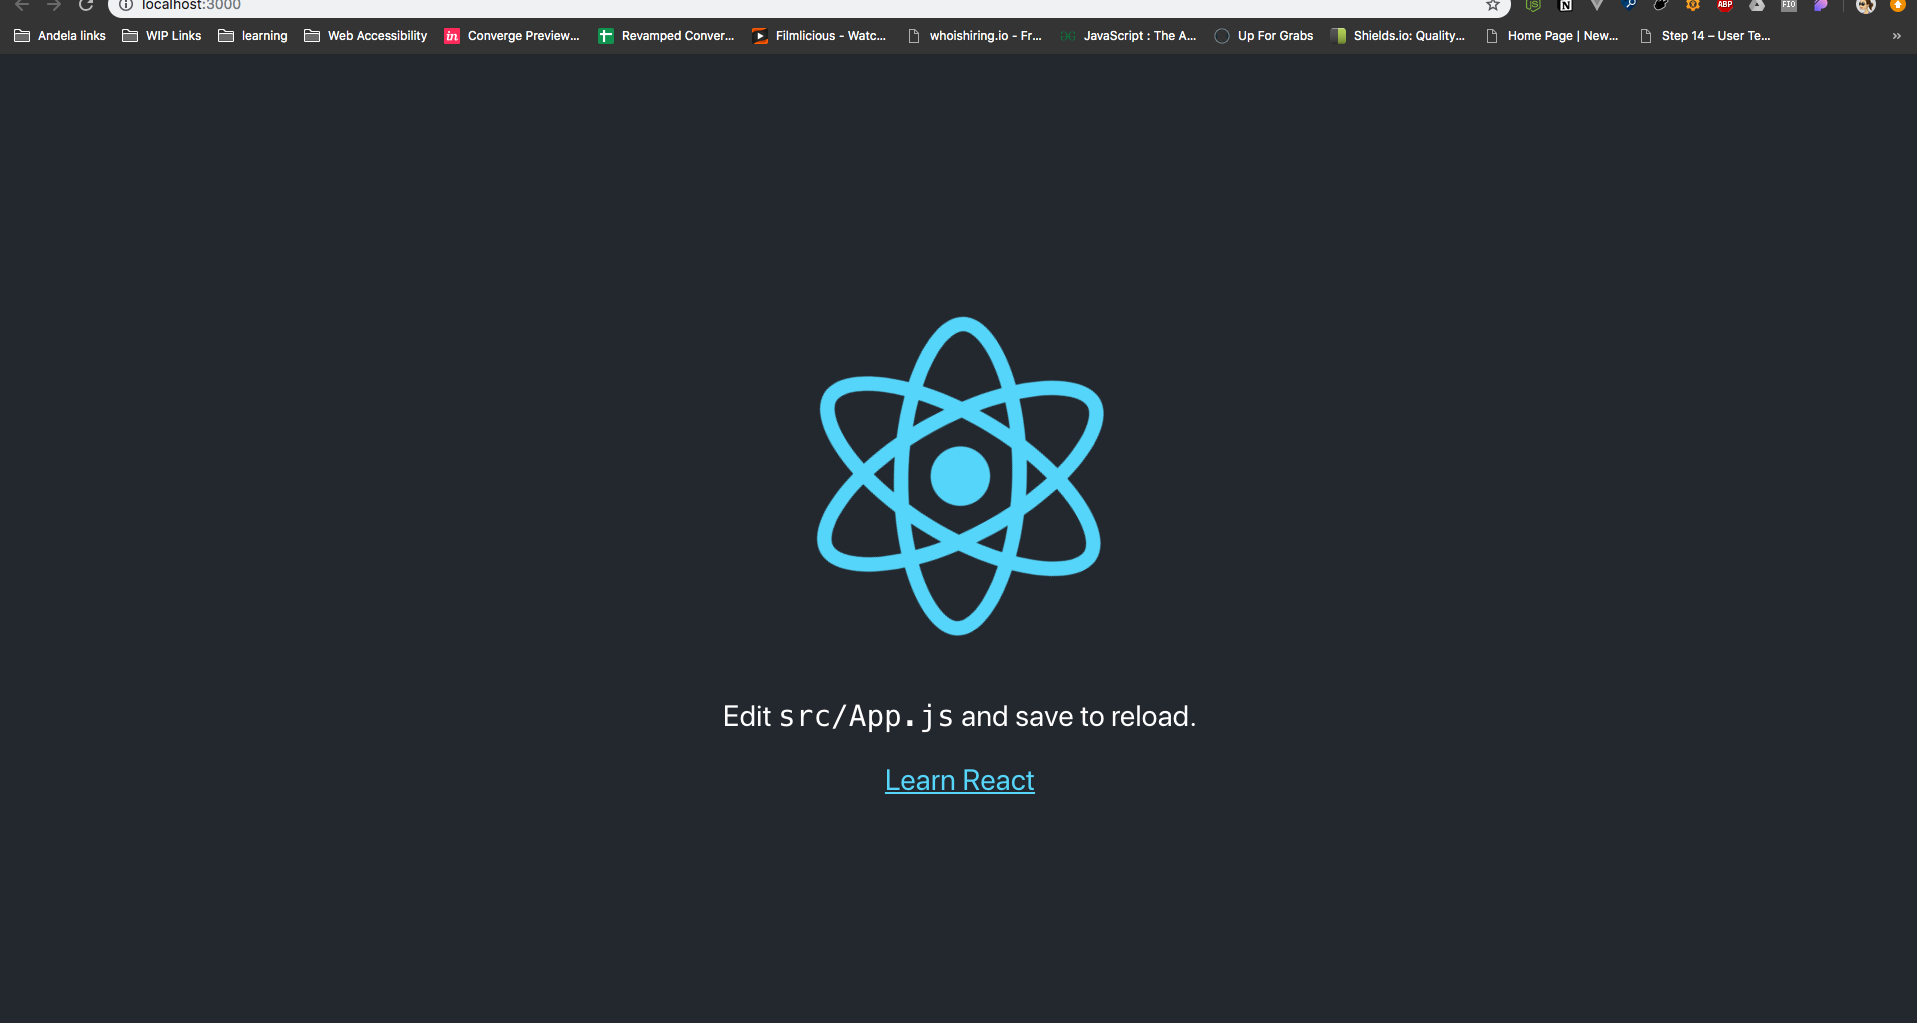 Screenshot of the React welcome page.